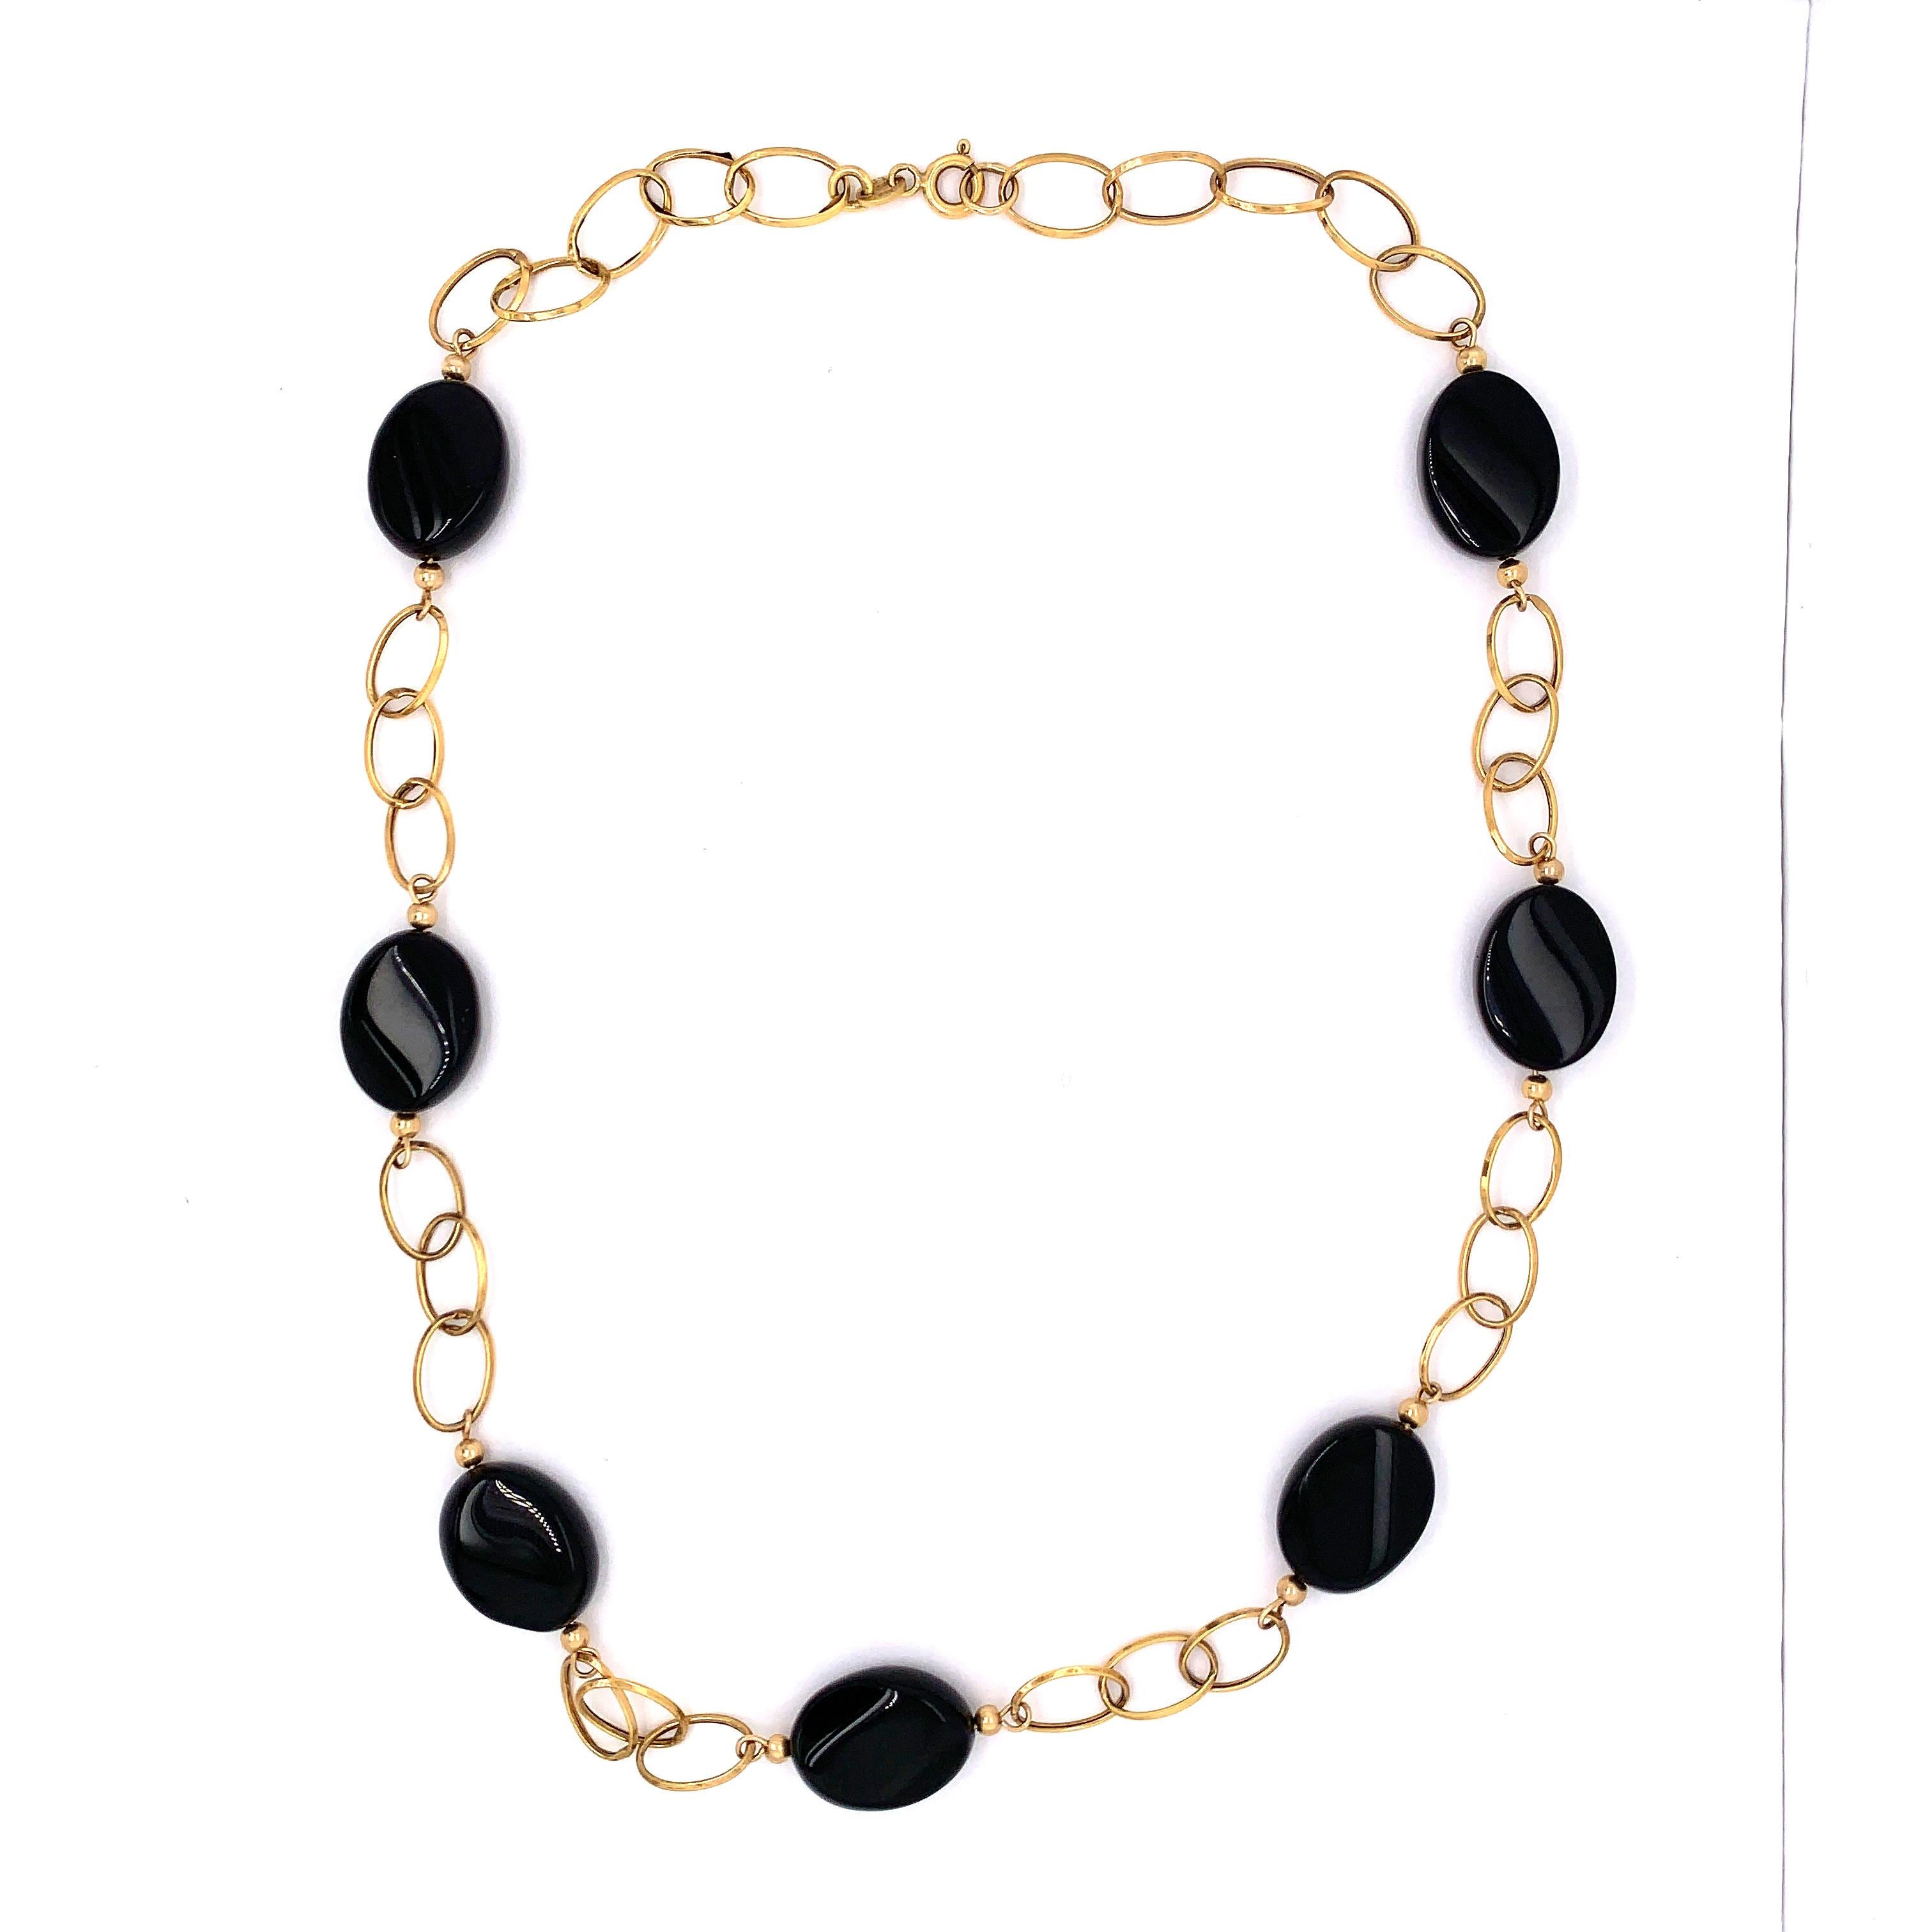 Modern 14 Karat Yellow Gold Link Necklace with Ebony Stones 21.2 Grams Total For Sale